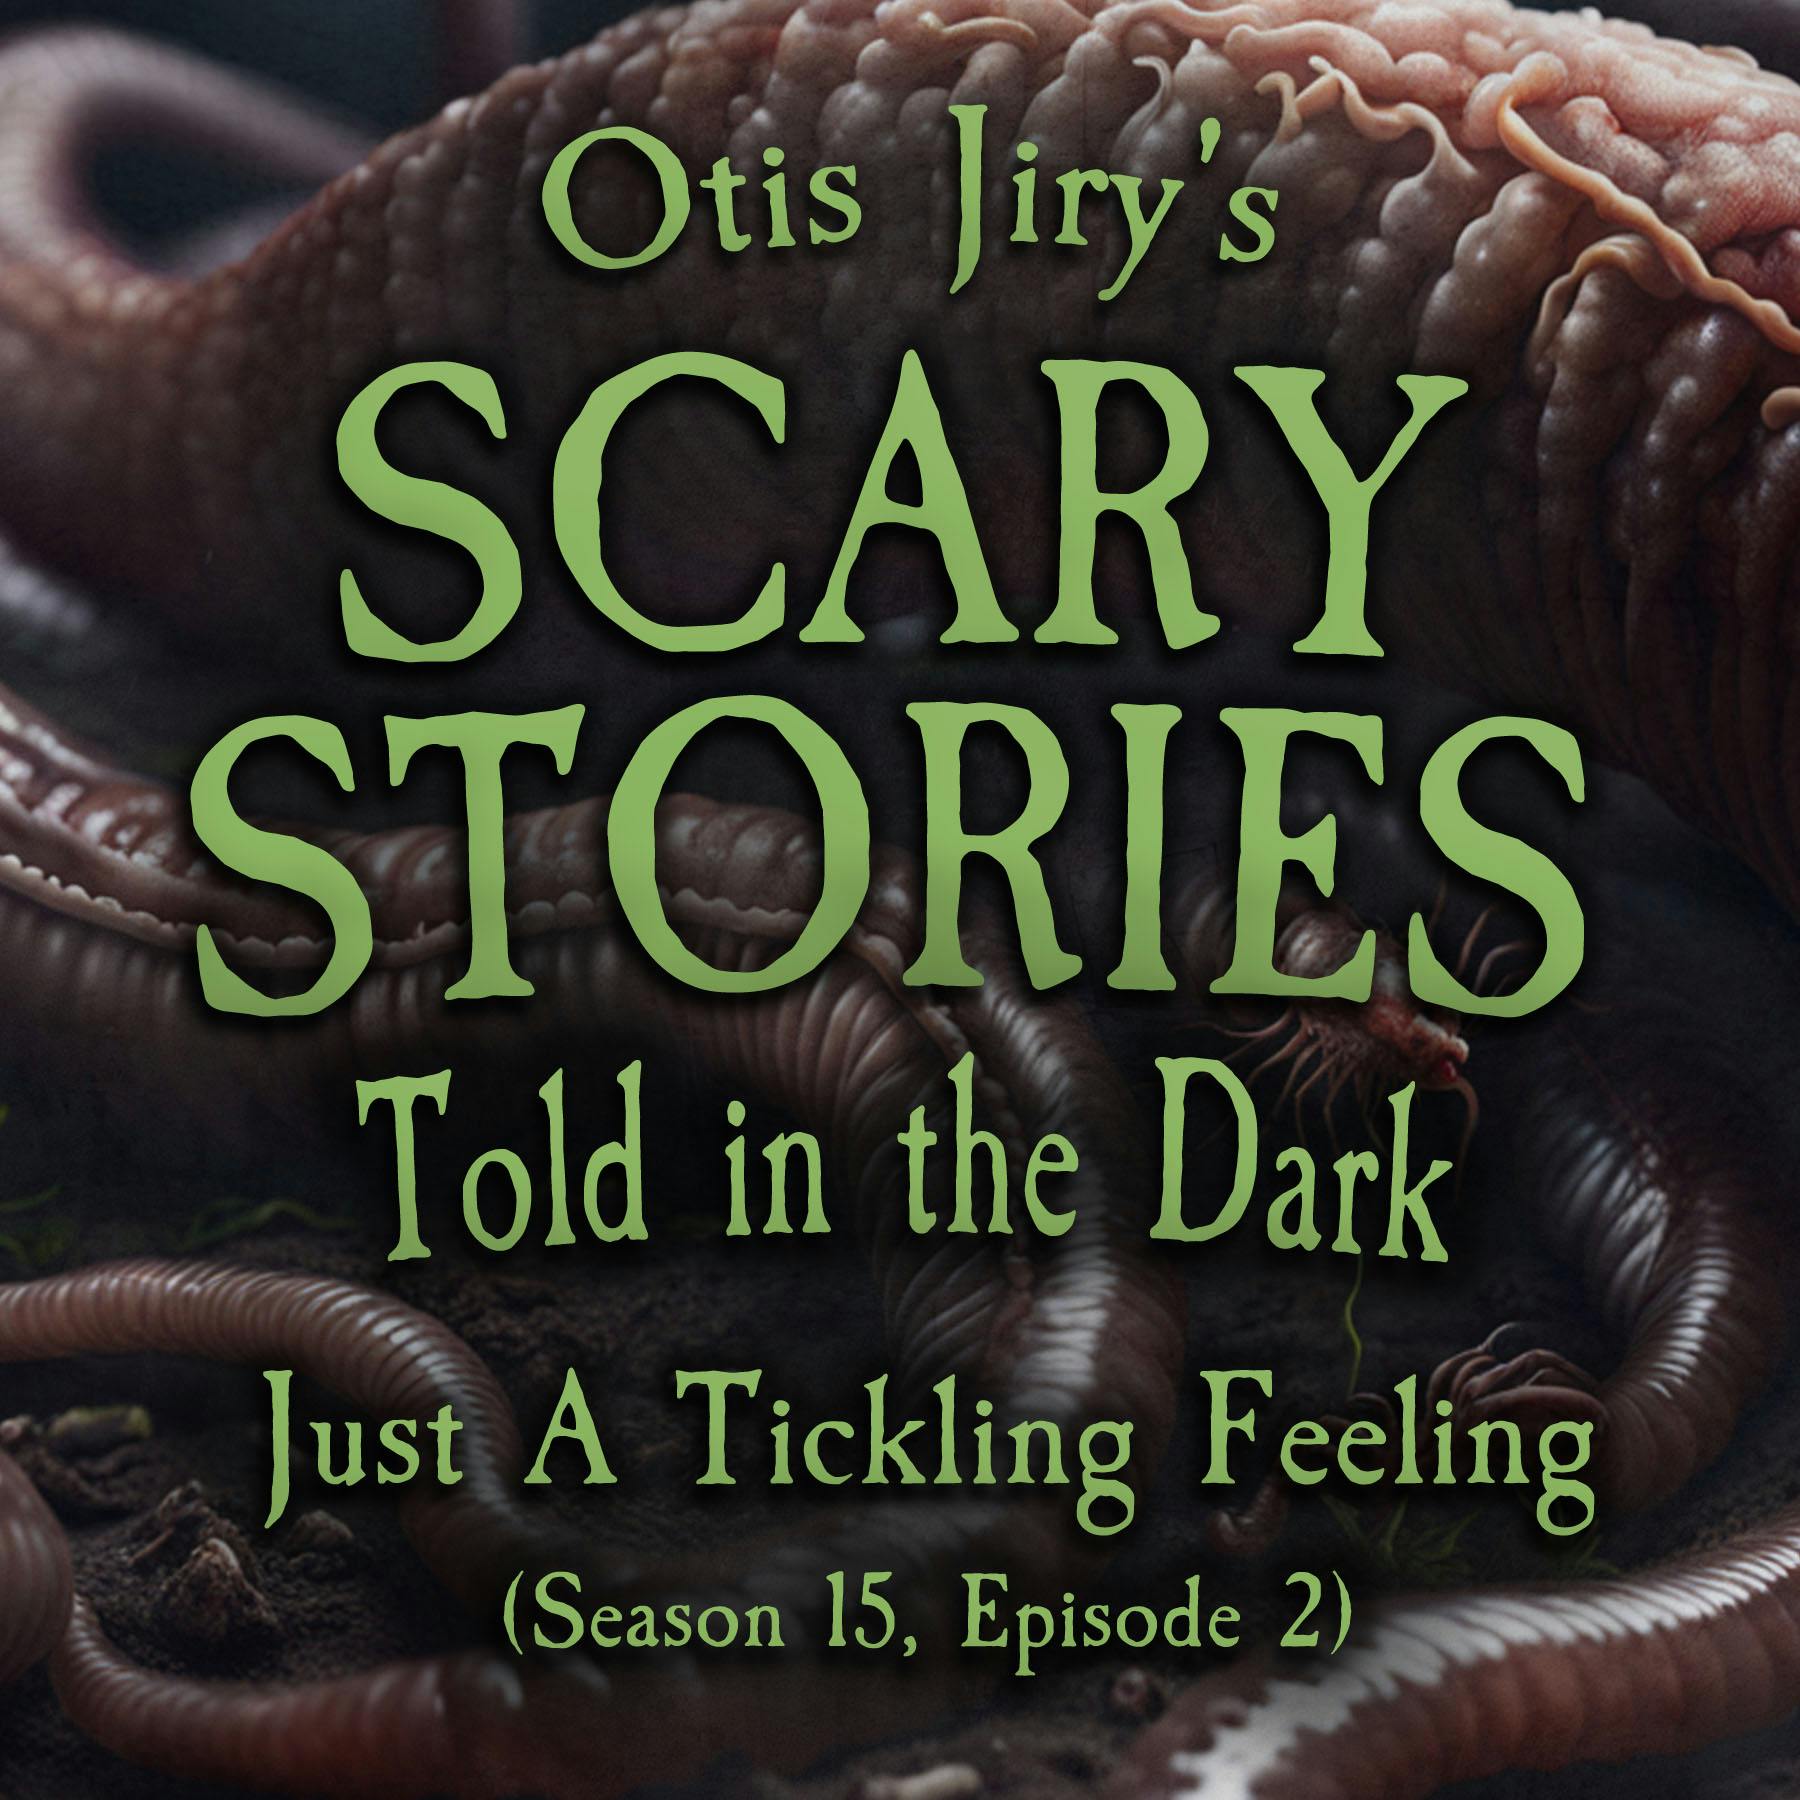 S15E02 - "Just a Tickling Feeling" – Scary Stories Told in the Dark